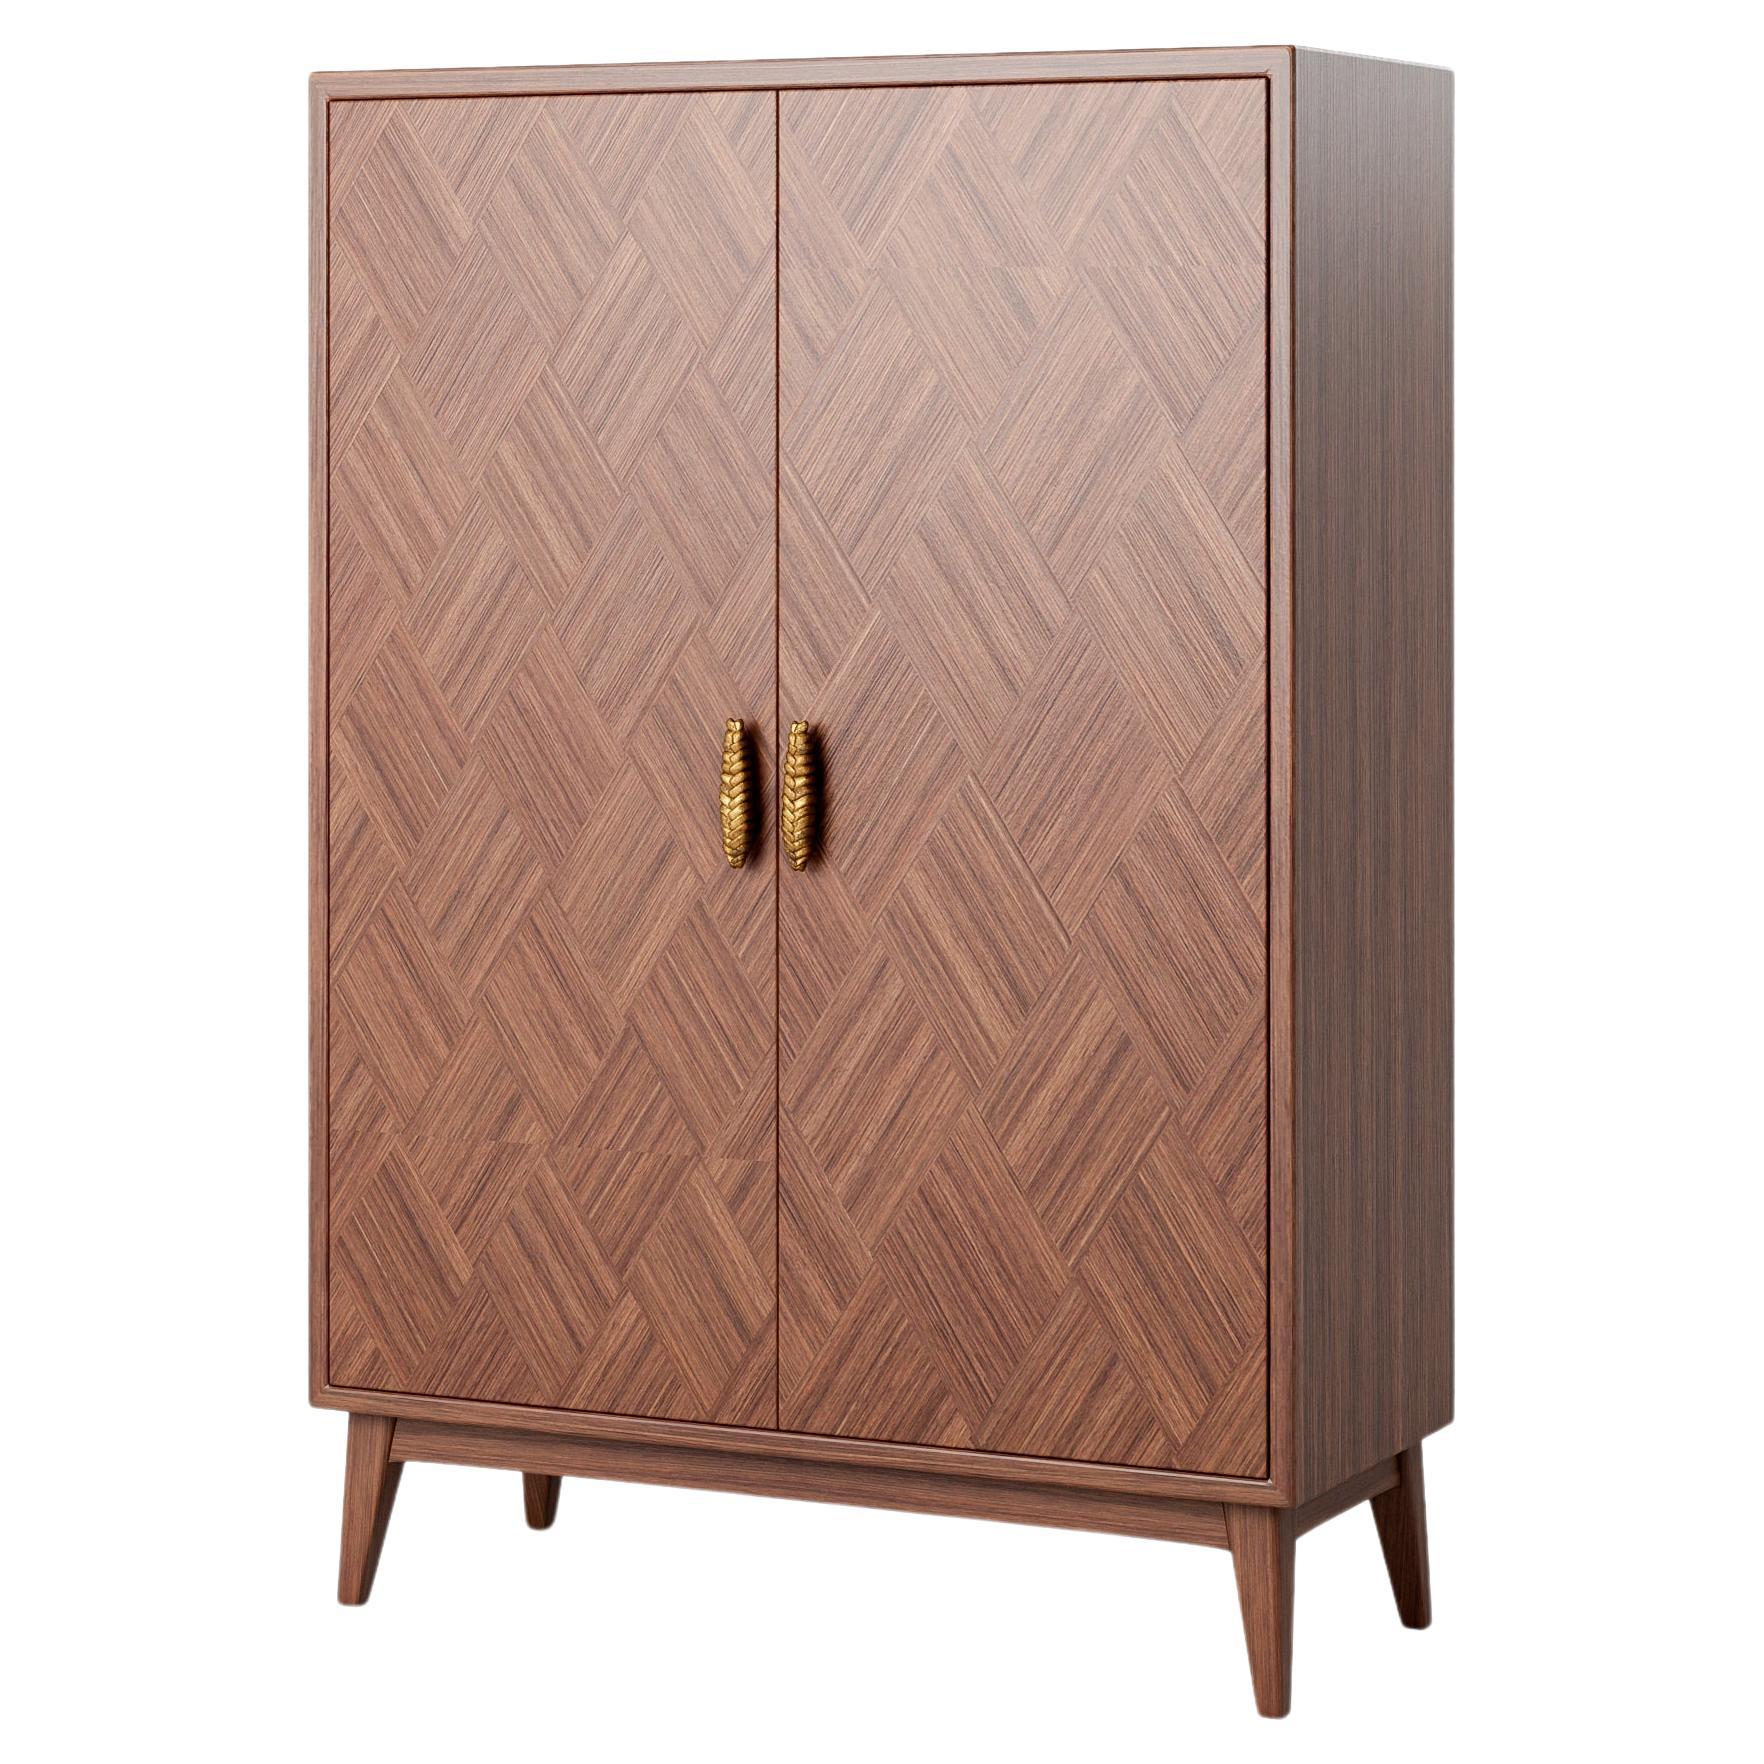 Contemporary Wood Veneer Cabinet with Bronze Handles For Sale